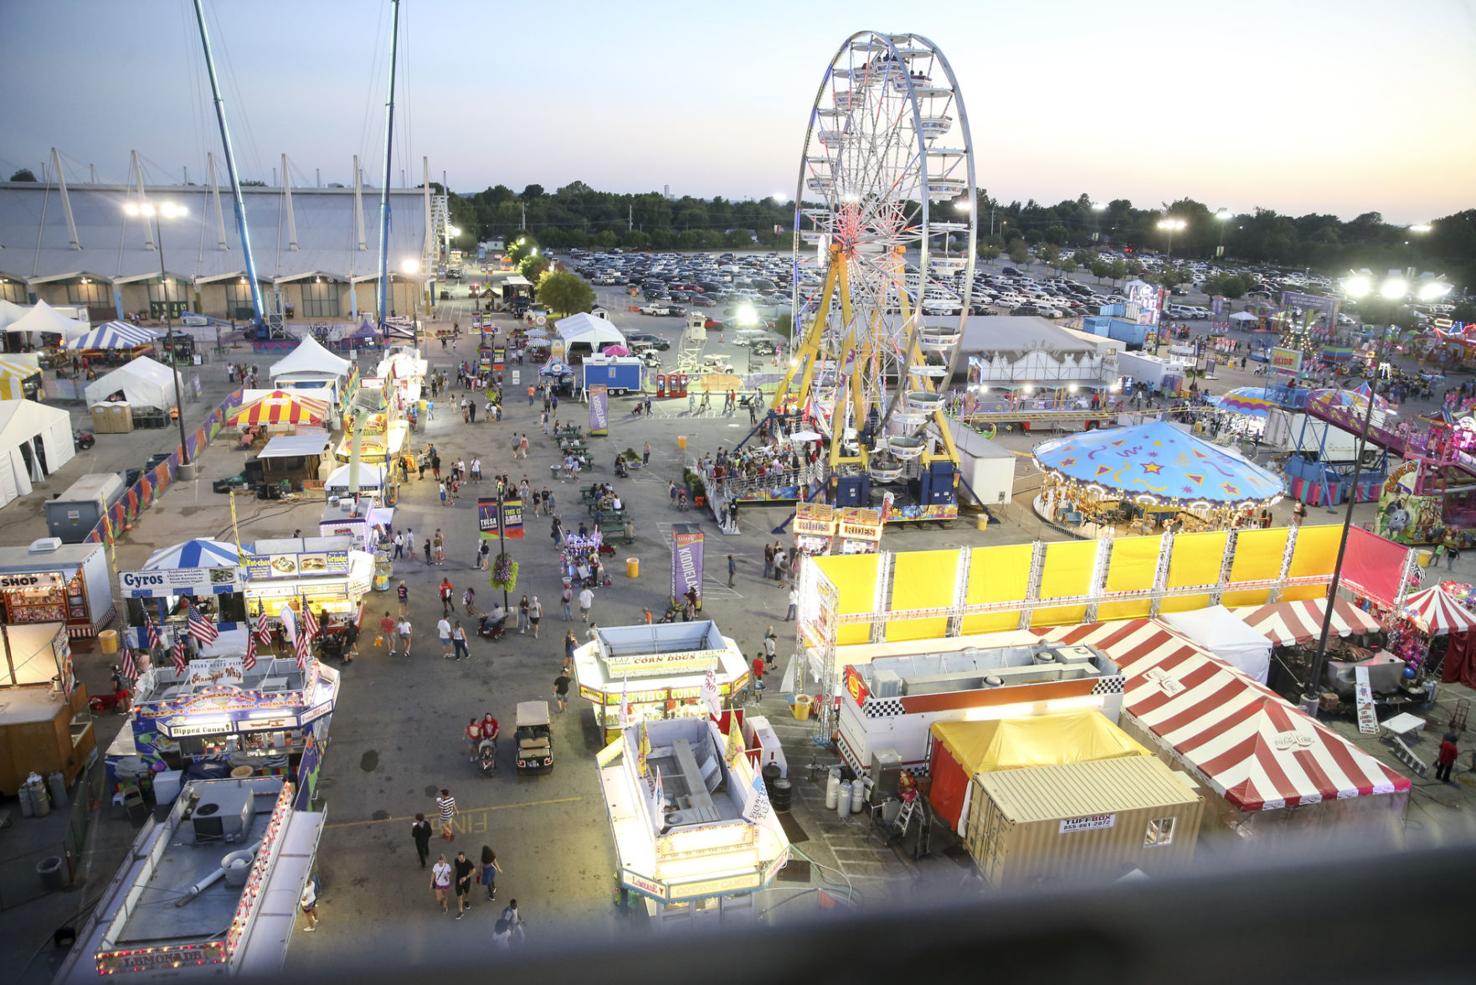 Attendance at Tulsa State Fair up slightly this year